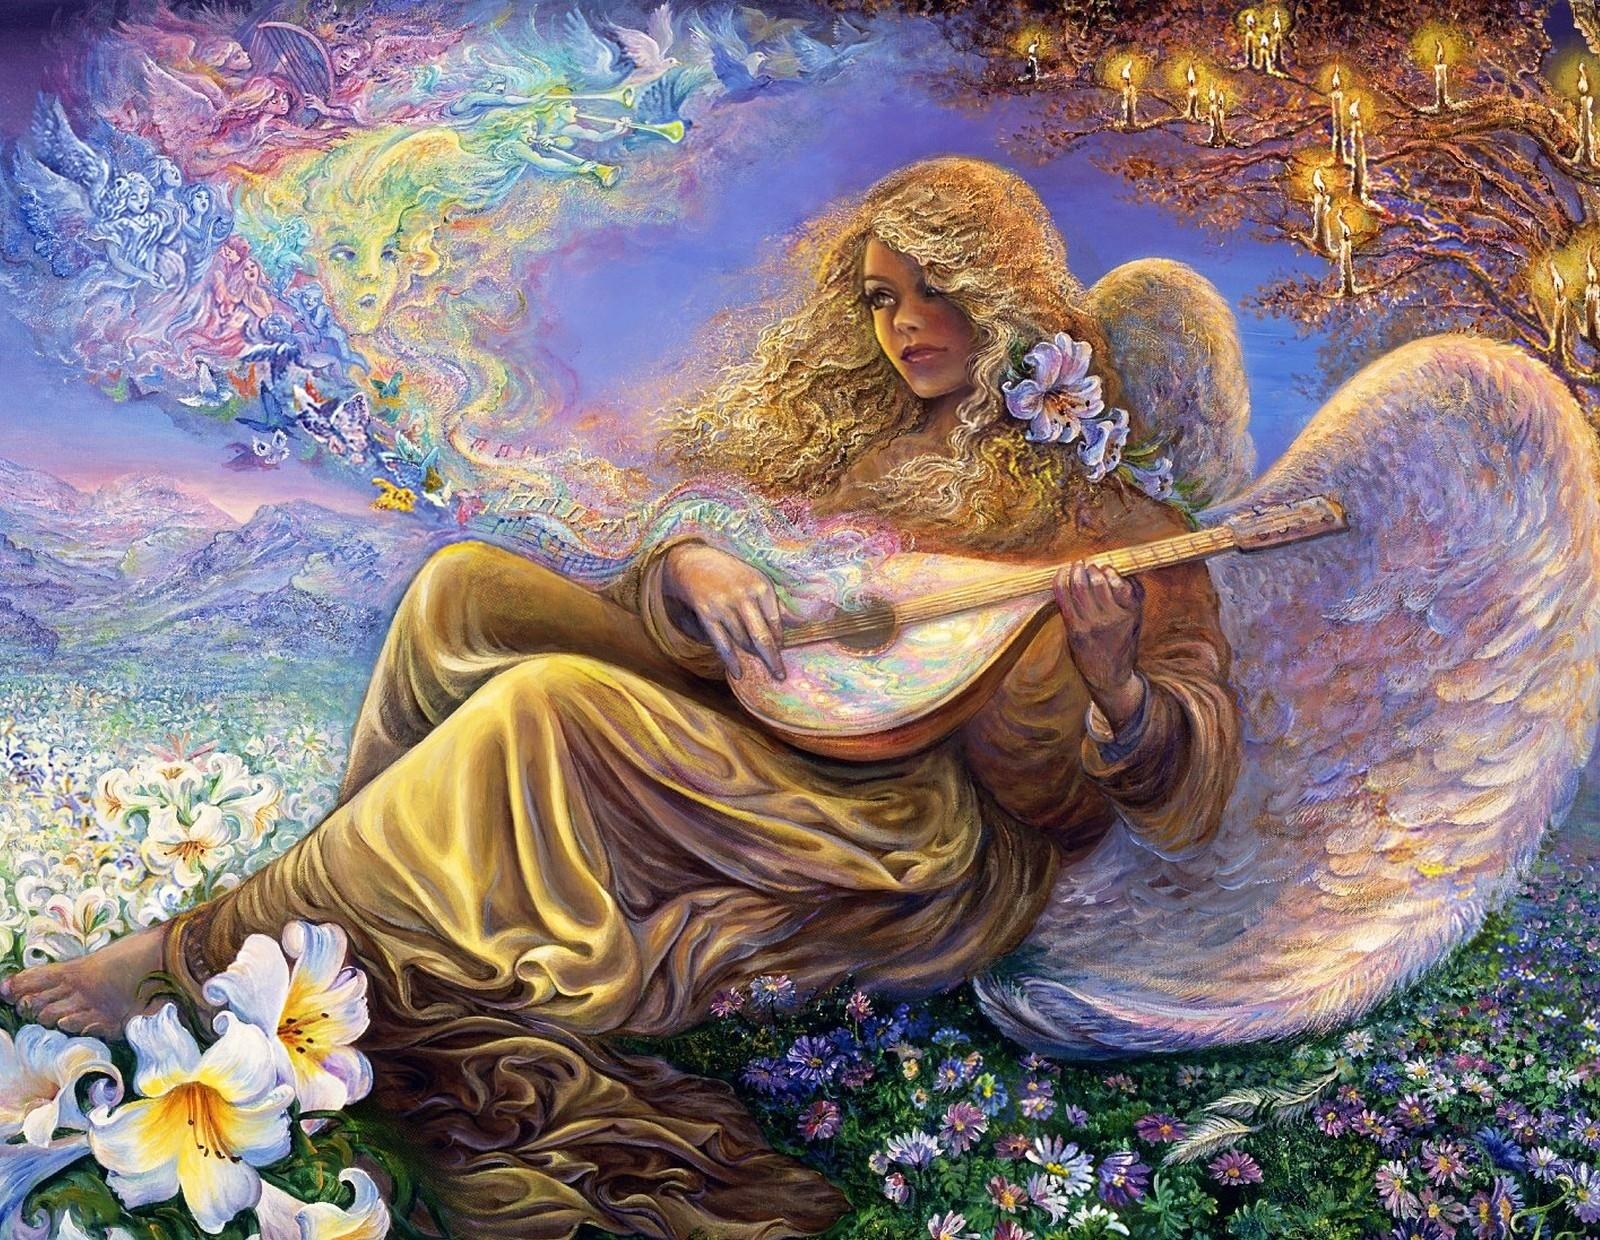 1920x1080 Background fantasy, angel, music, flowers, candles, girl, melody